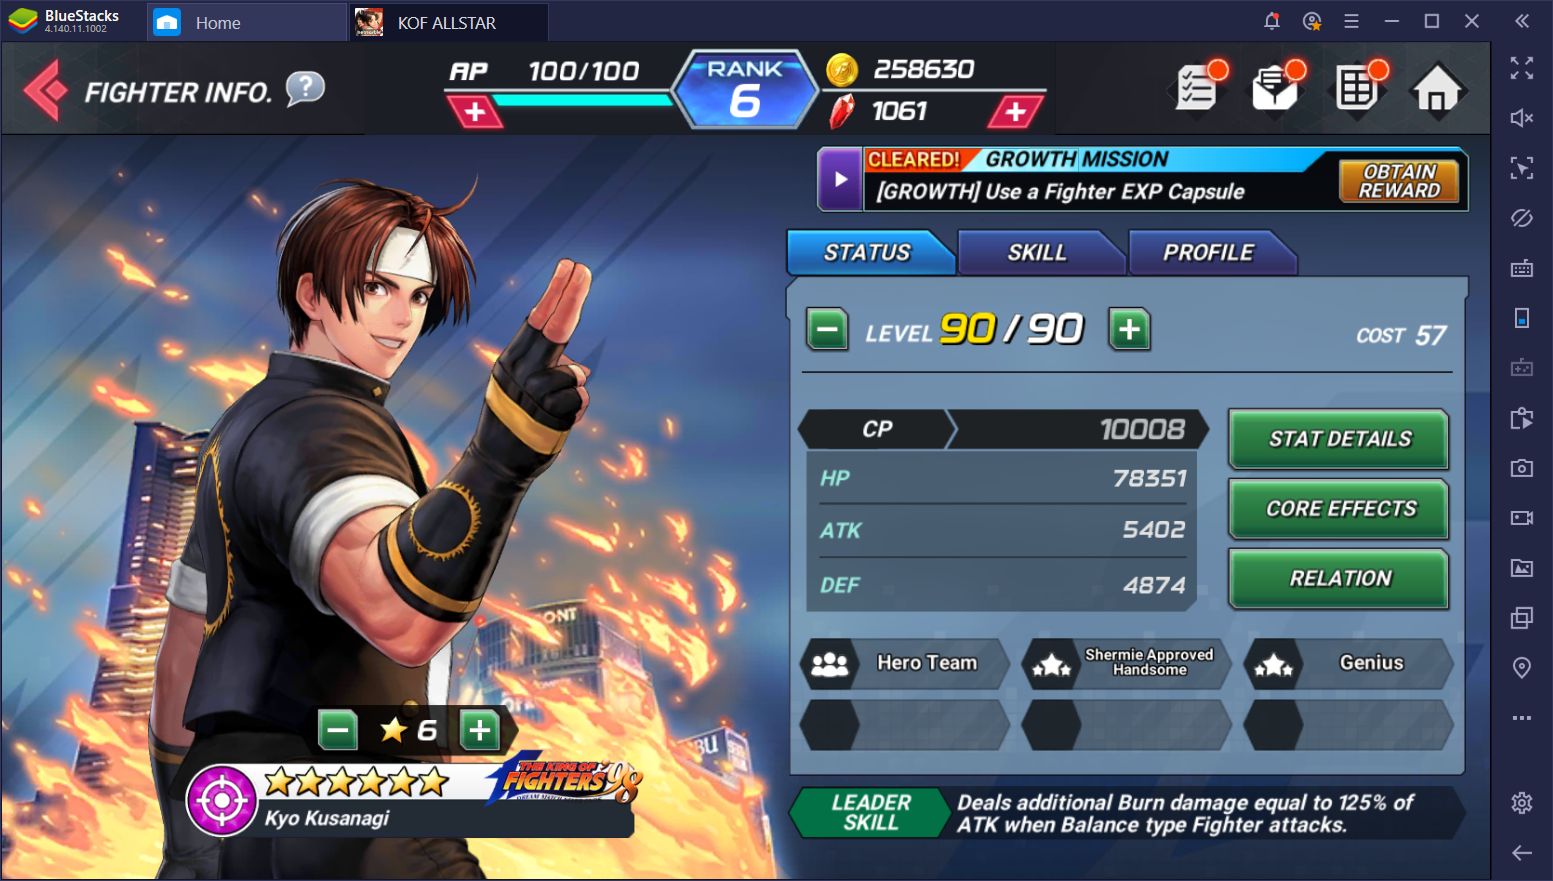 The Best Characters in King of Fighters ALLSTAR on PC